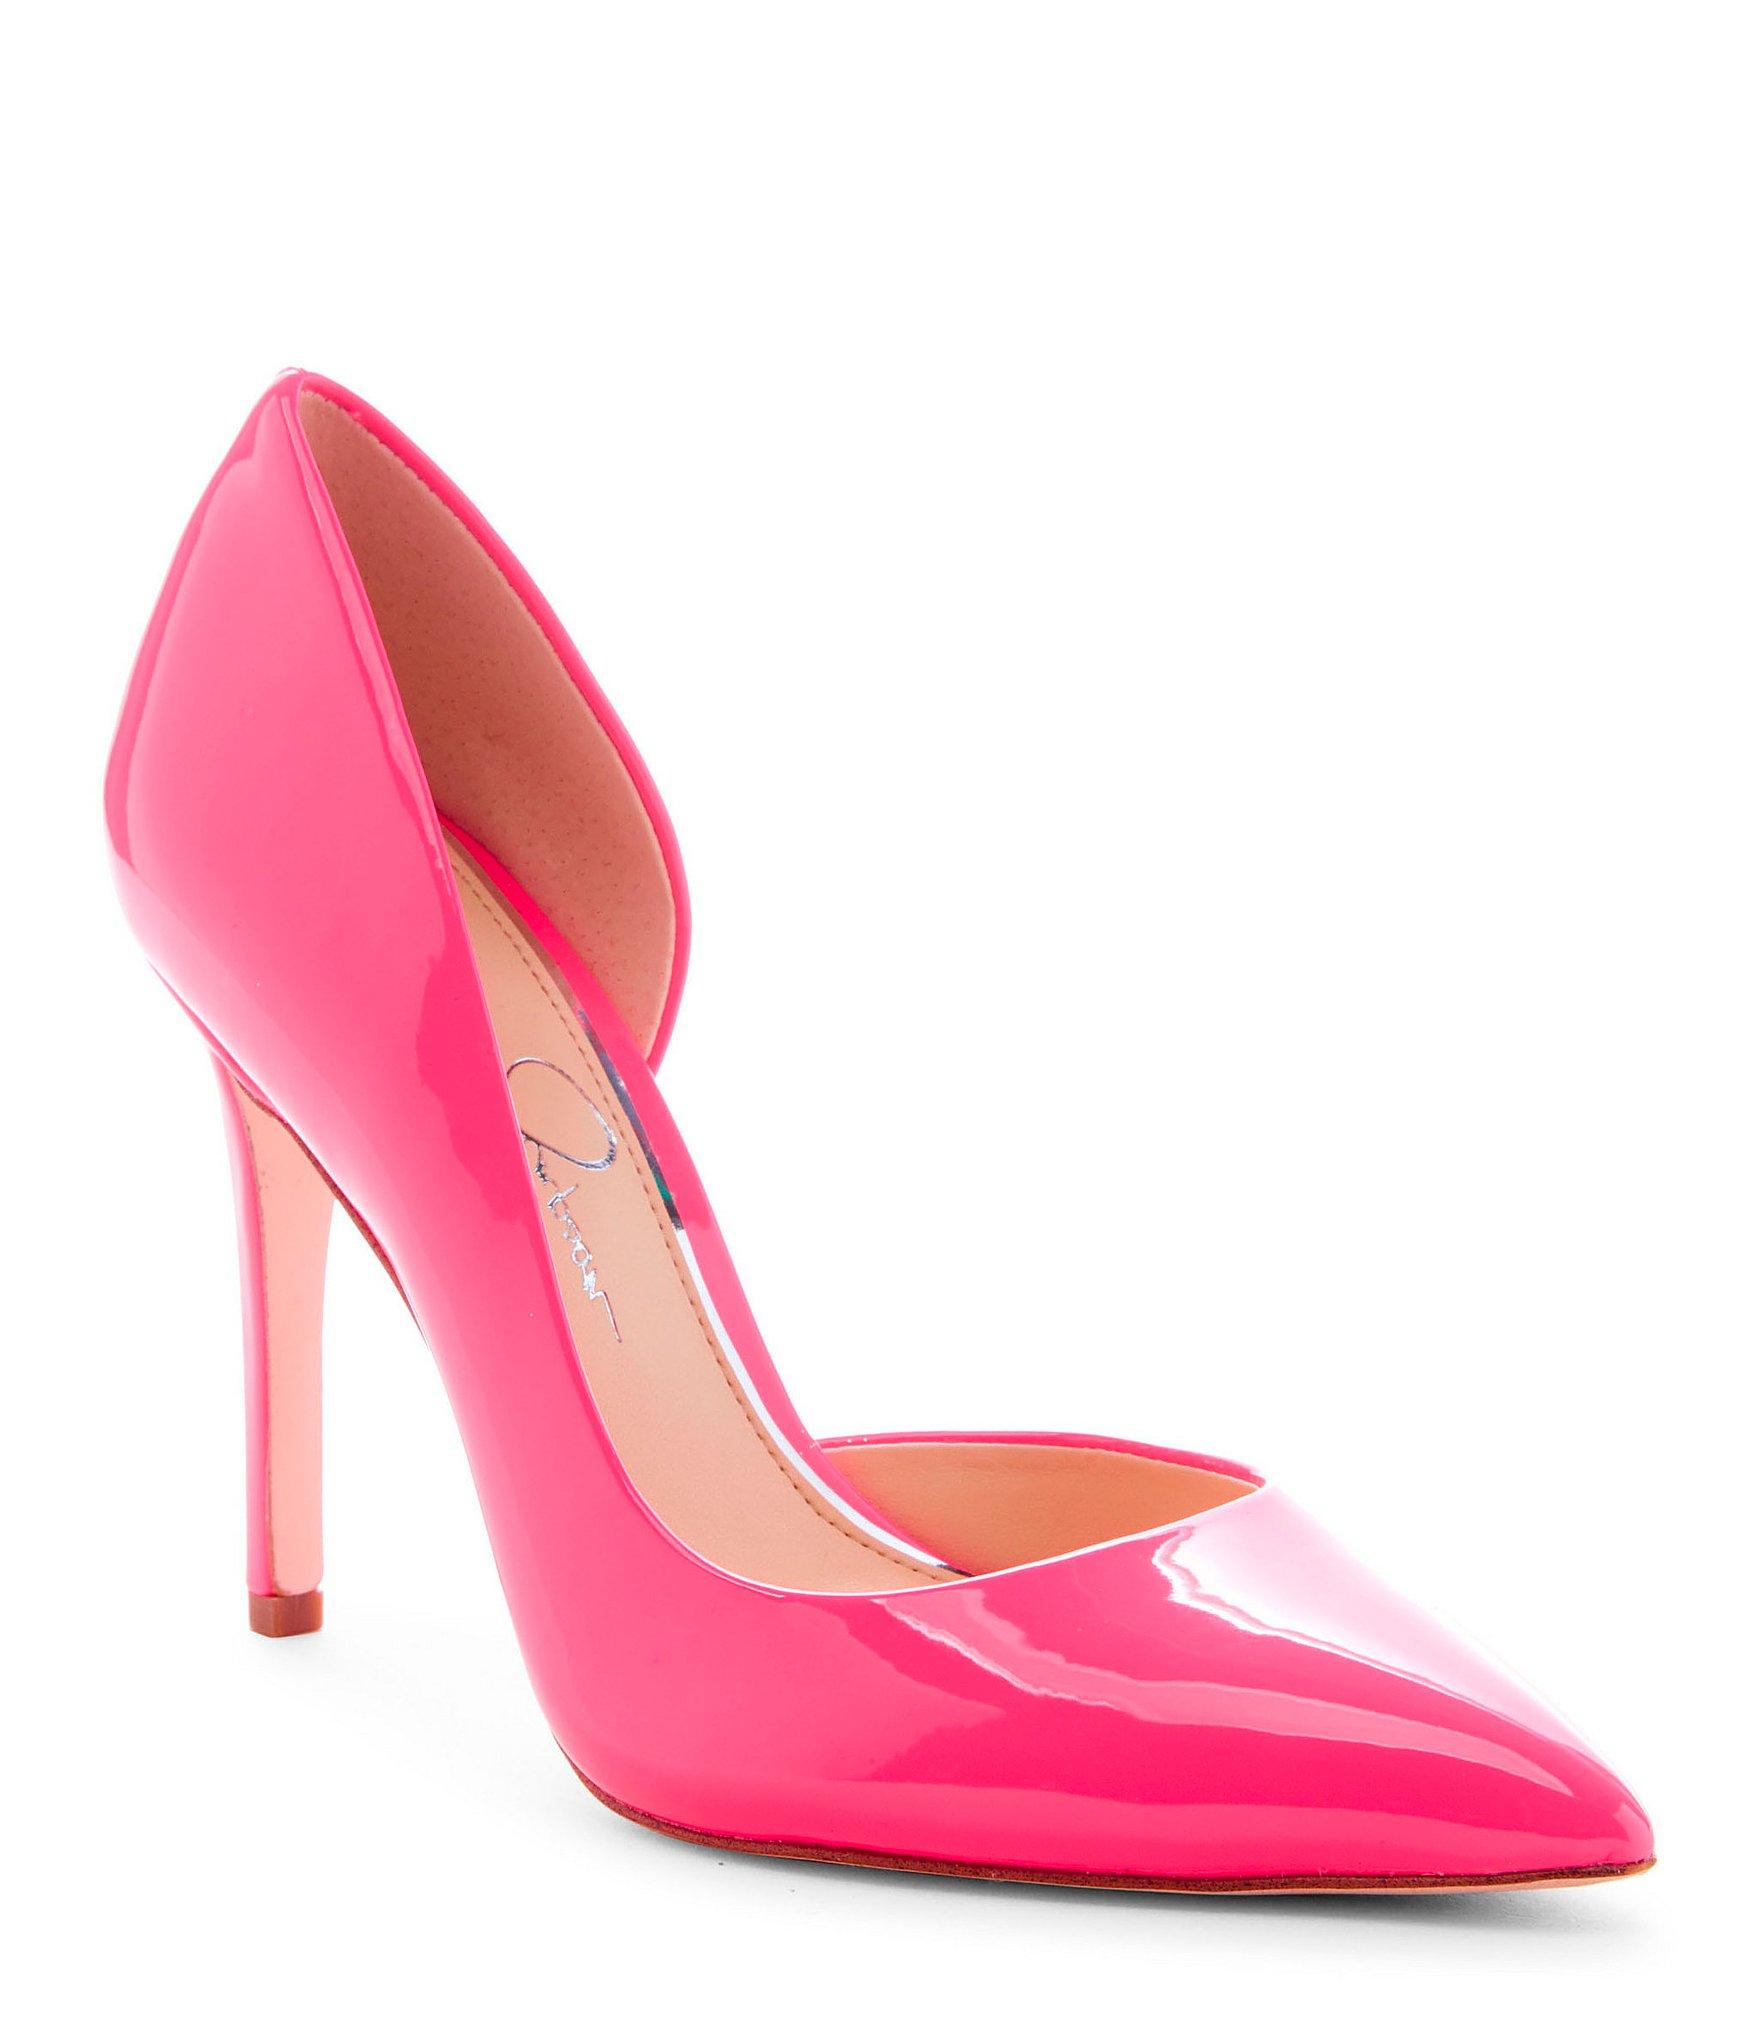 Jessica Simpson Synthetic Prizma Patent D'orsay Pumps in Neon Pink ...